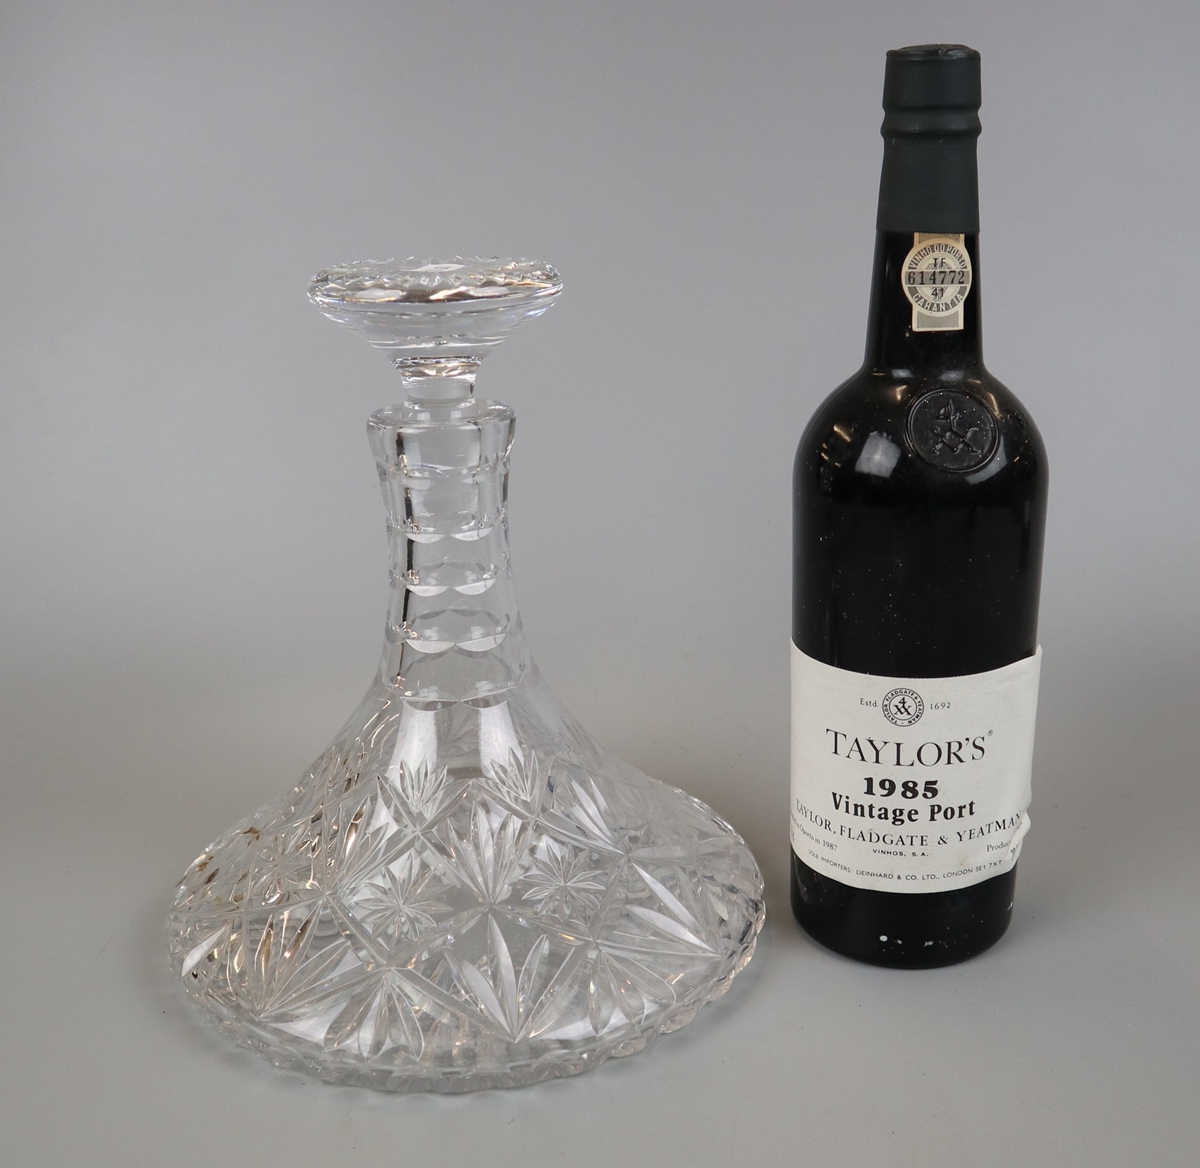 Taylors 1985 vintage Port with ships decanter